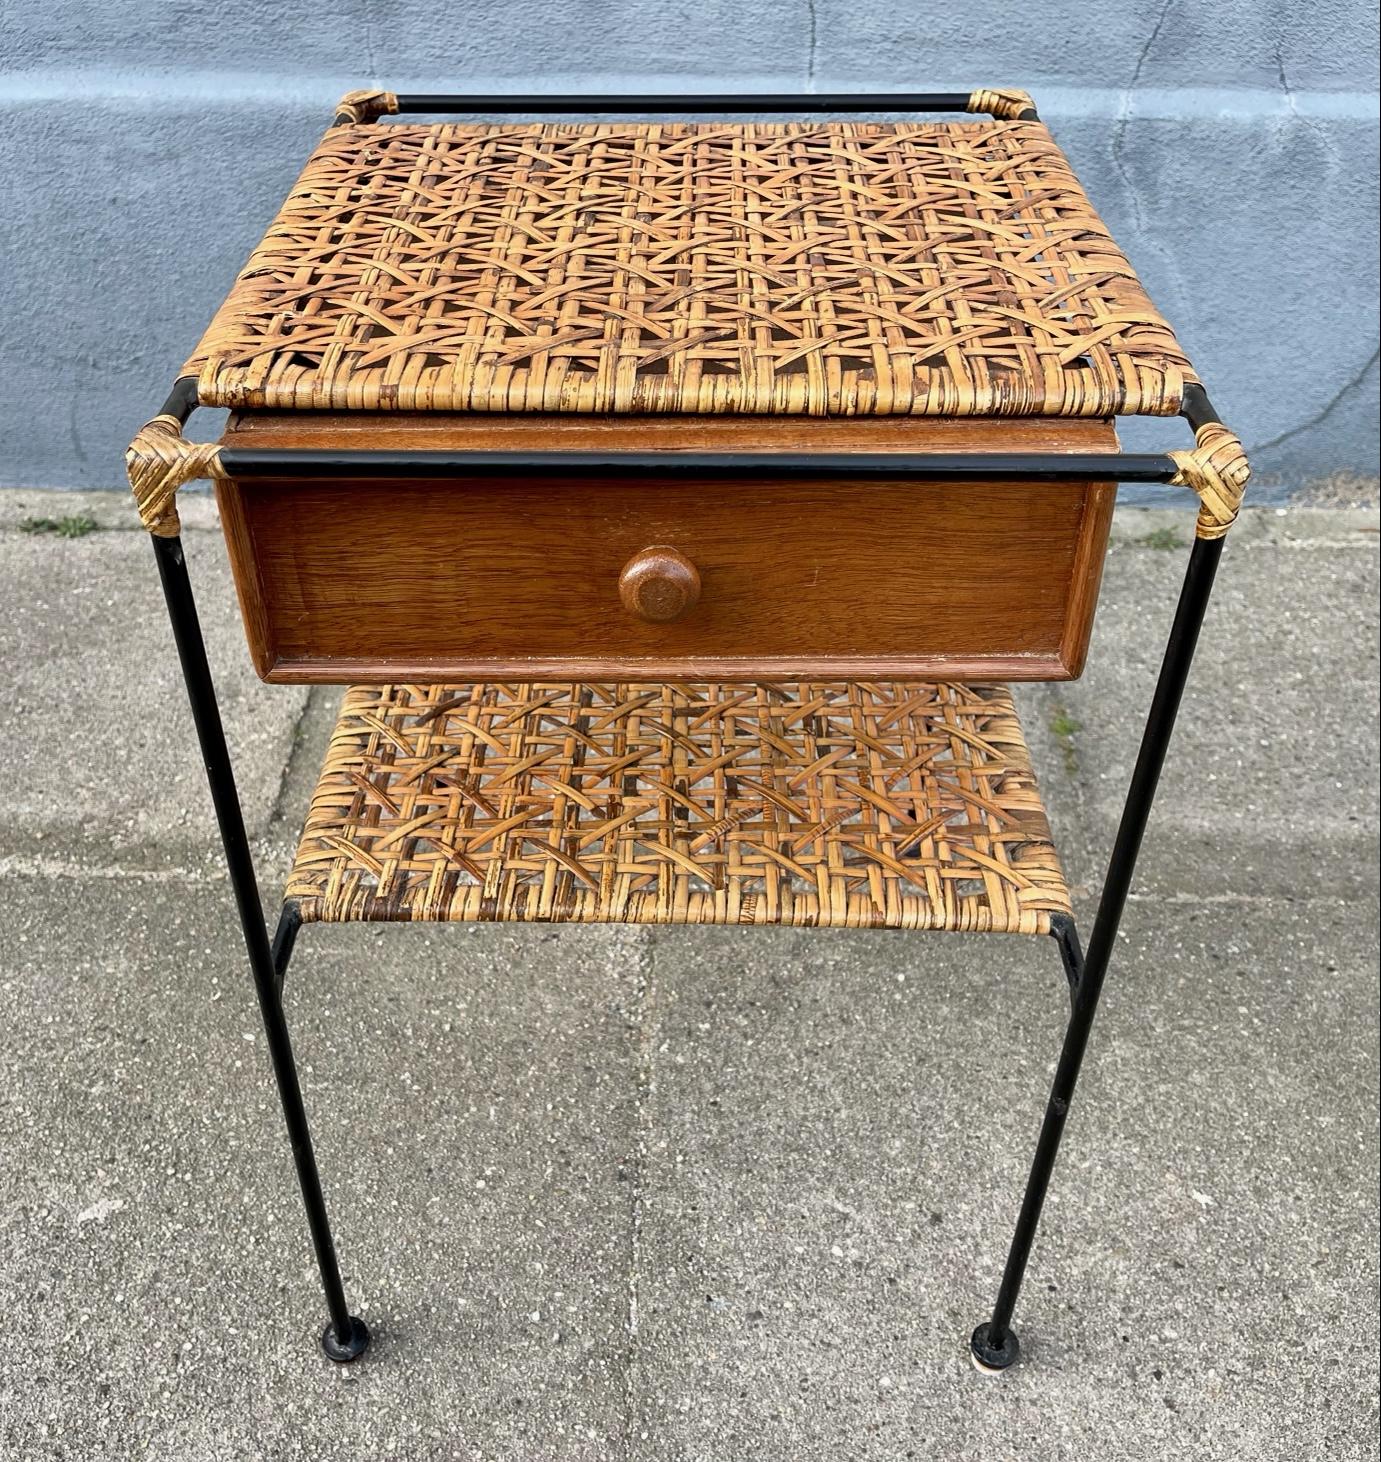 A Carl Auböck inspired small side, shaker or entry hall table made from tubular black painted solid steel, woven rattan table top a magazine shelf and featuring a practical single drawer in teak. Its was made in Italy during the 1960s and the rattan